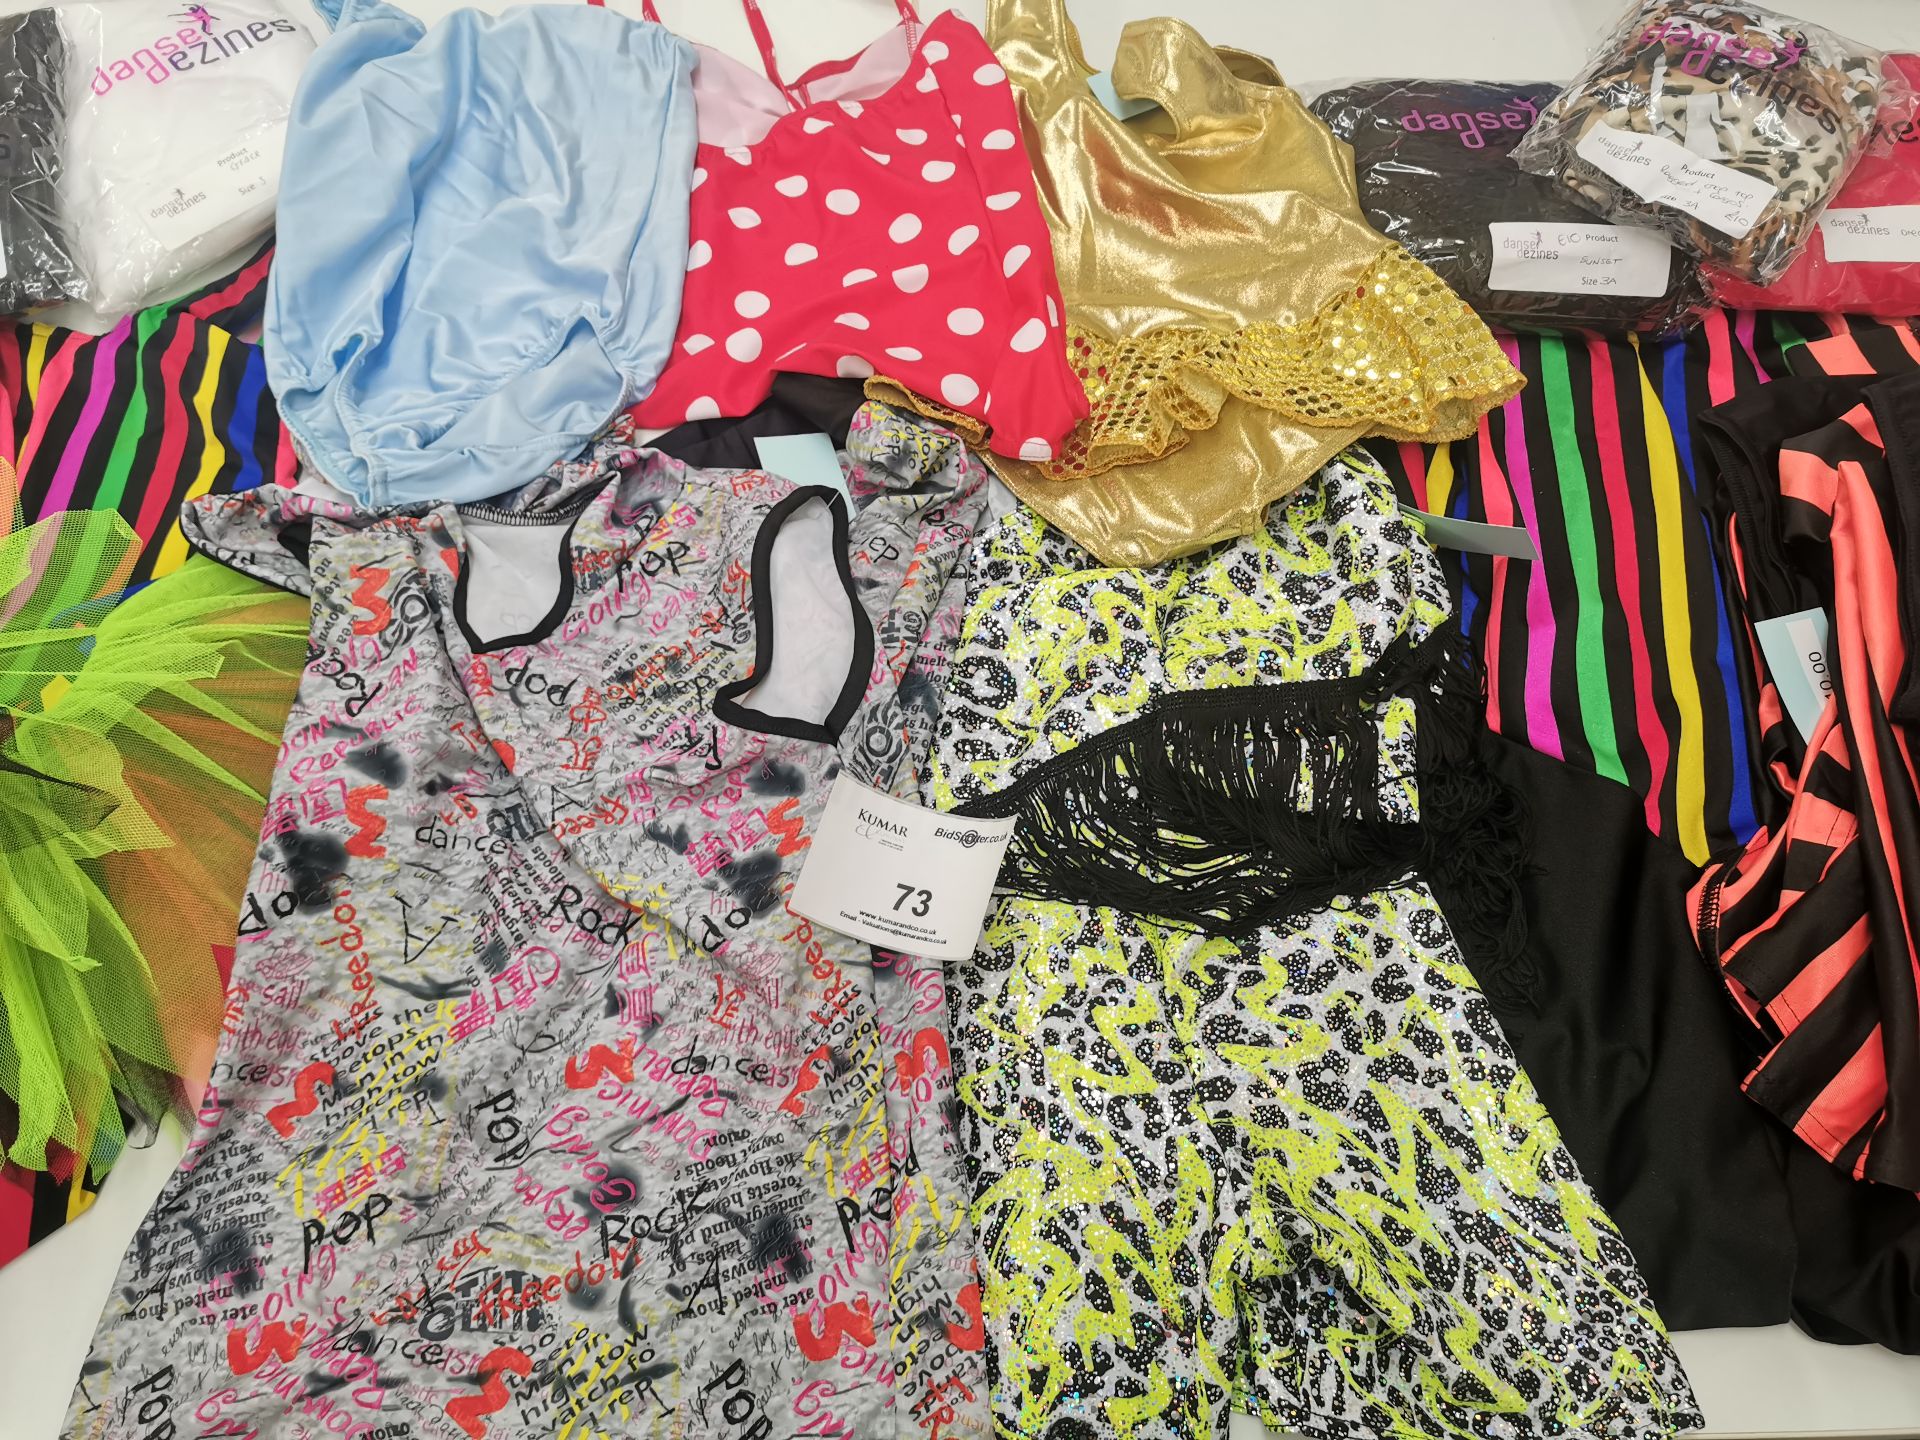 100pc Dance clothes including dresses,jumpsuits,leotards,catsuits. Various designs and sizes